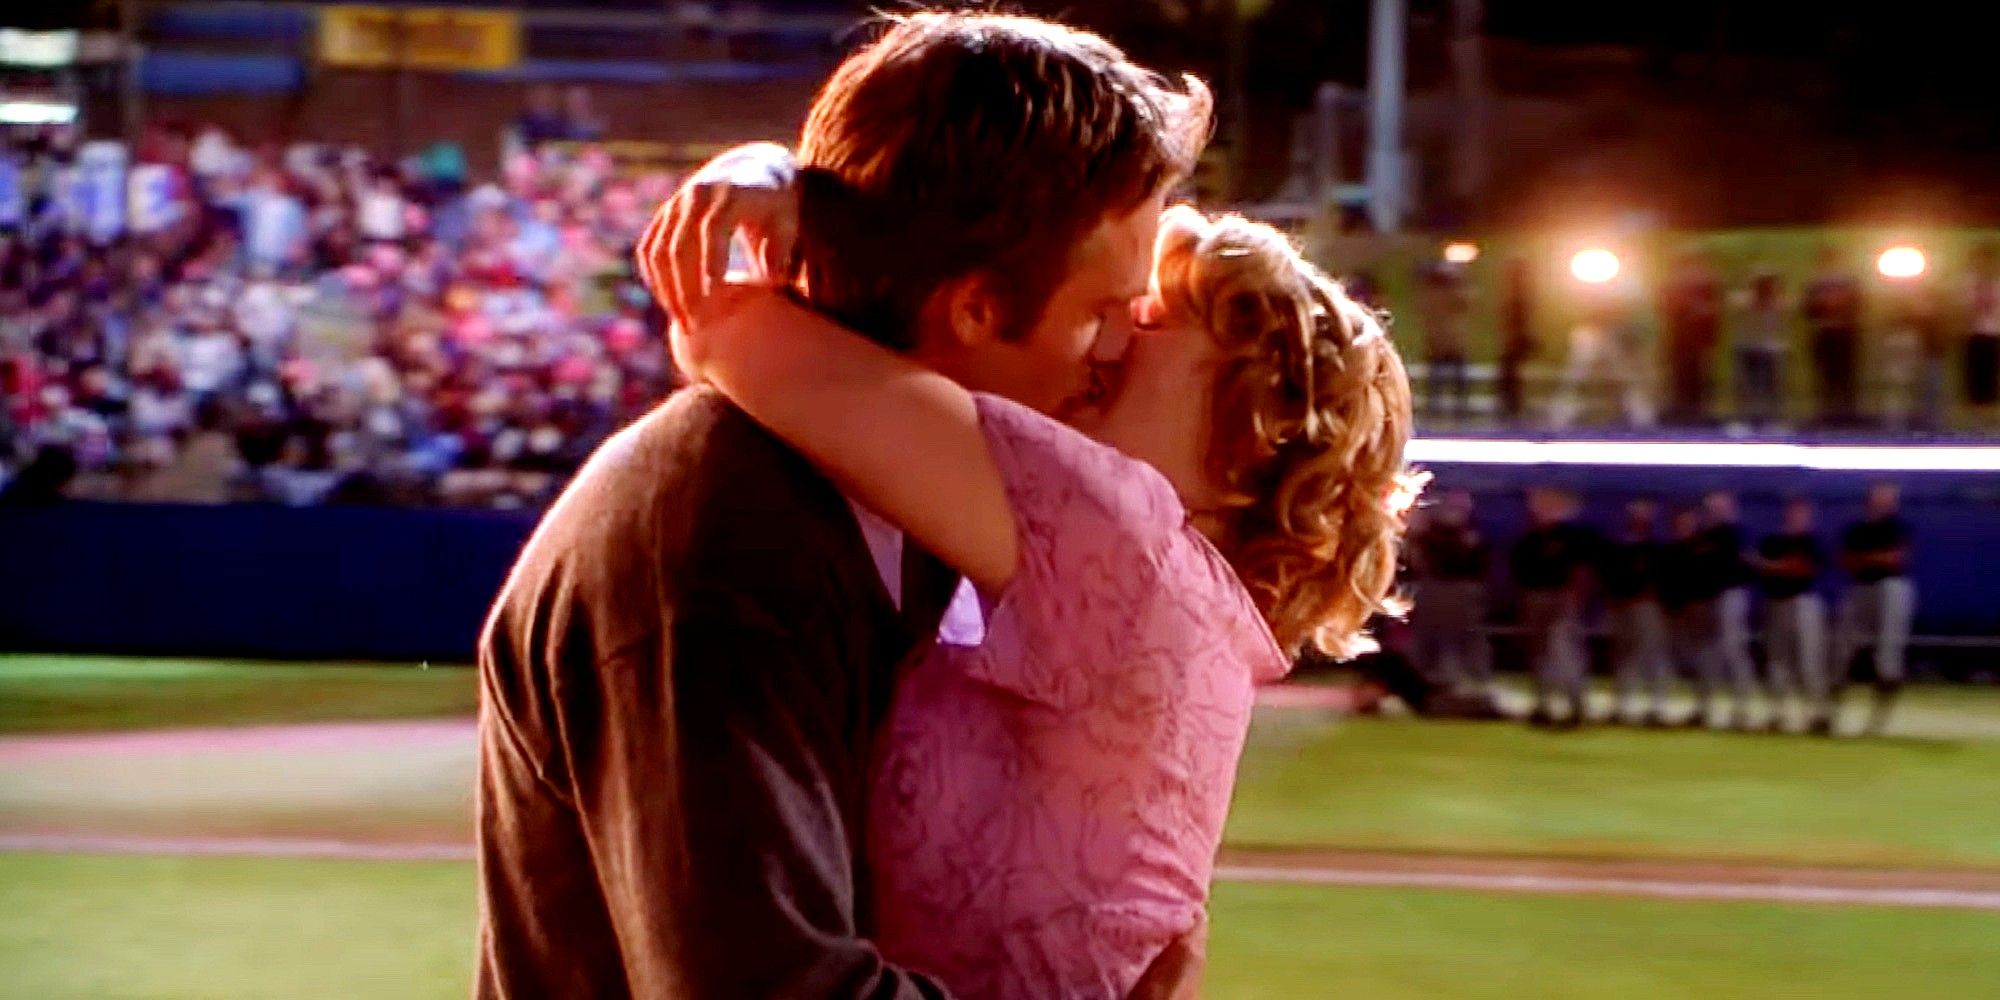 Josie and Sam kiss on a baseball field in Never Been Kissed